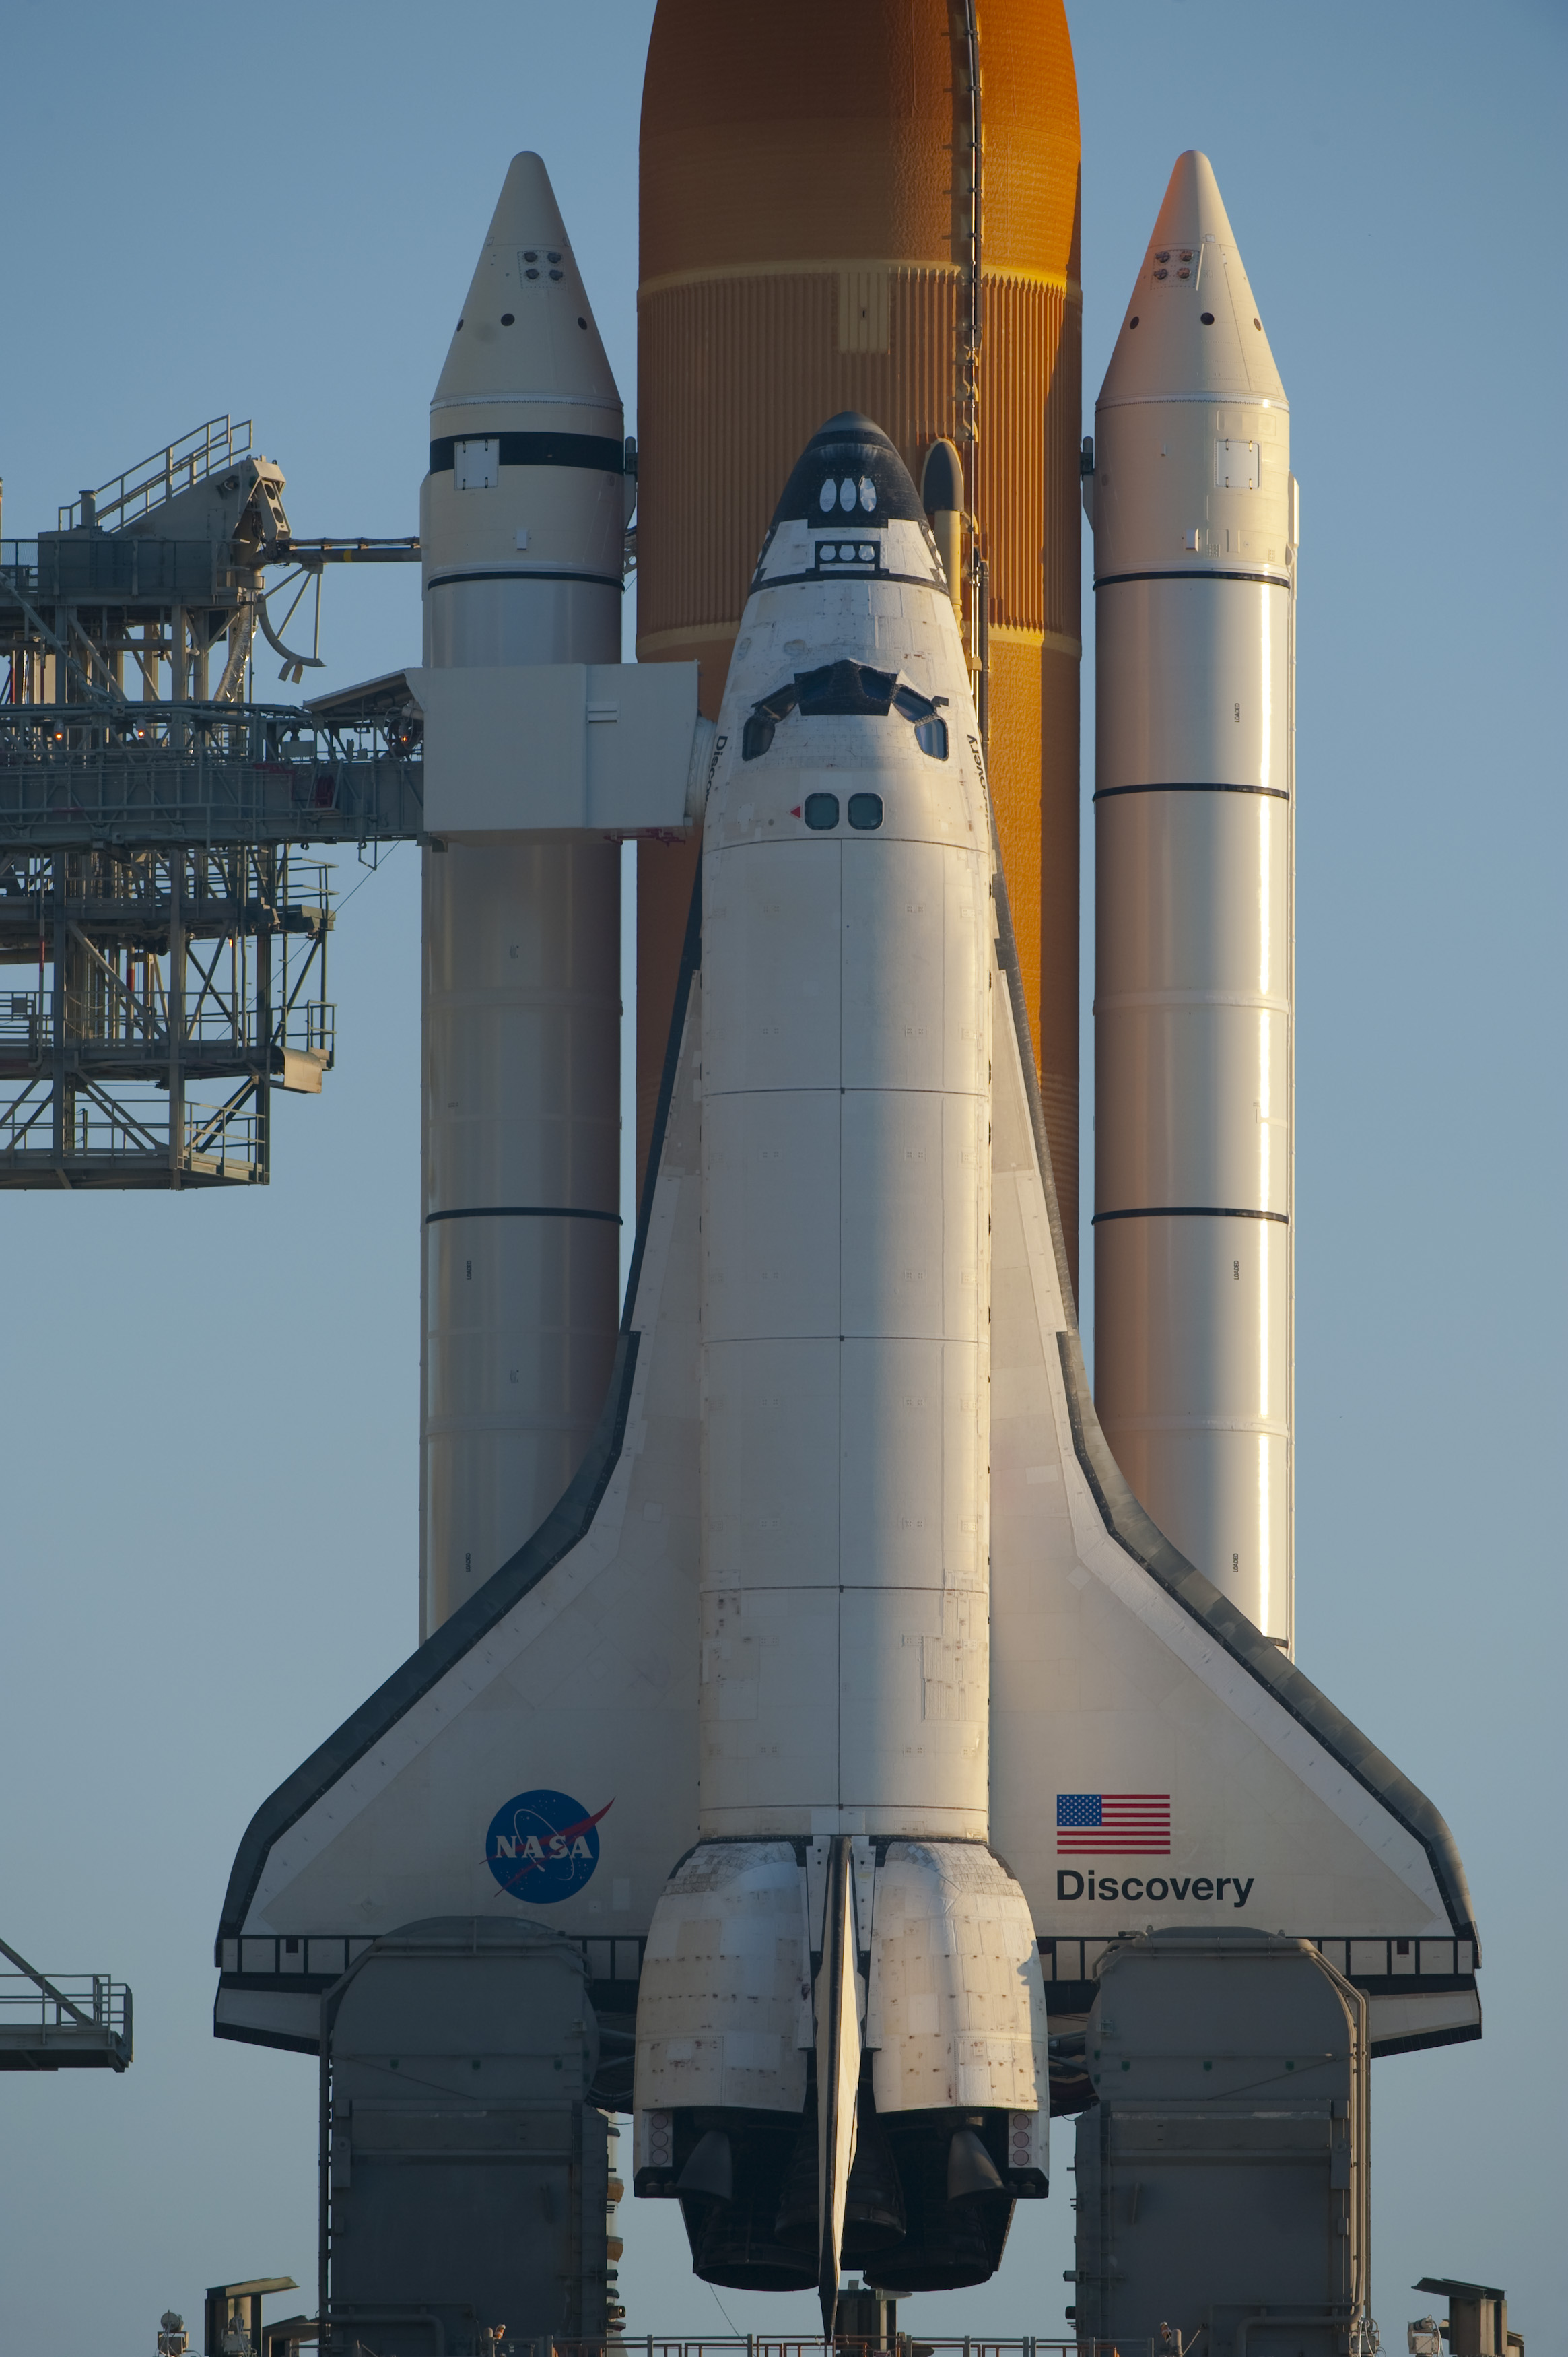 Space in Images - 2009 - 08 - Space Shuttle Discovery on the launch pad